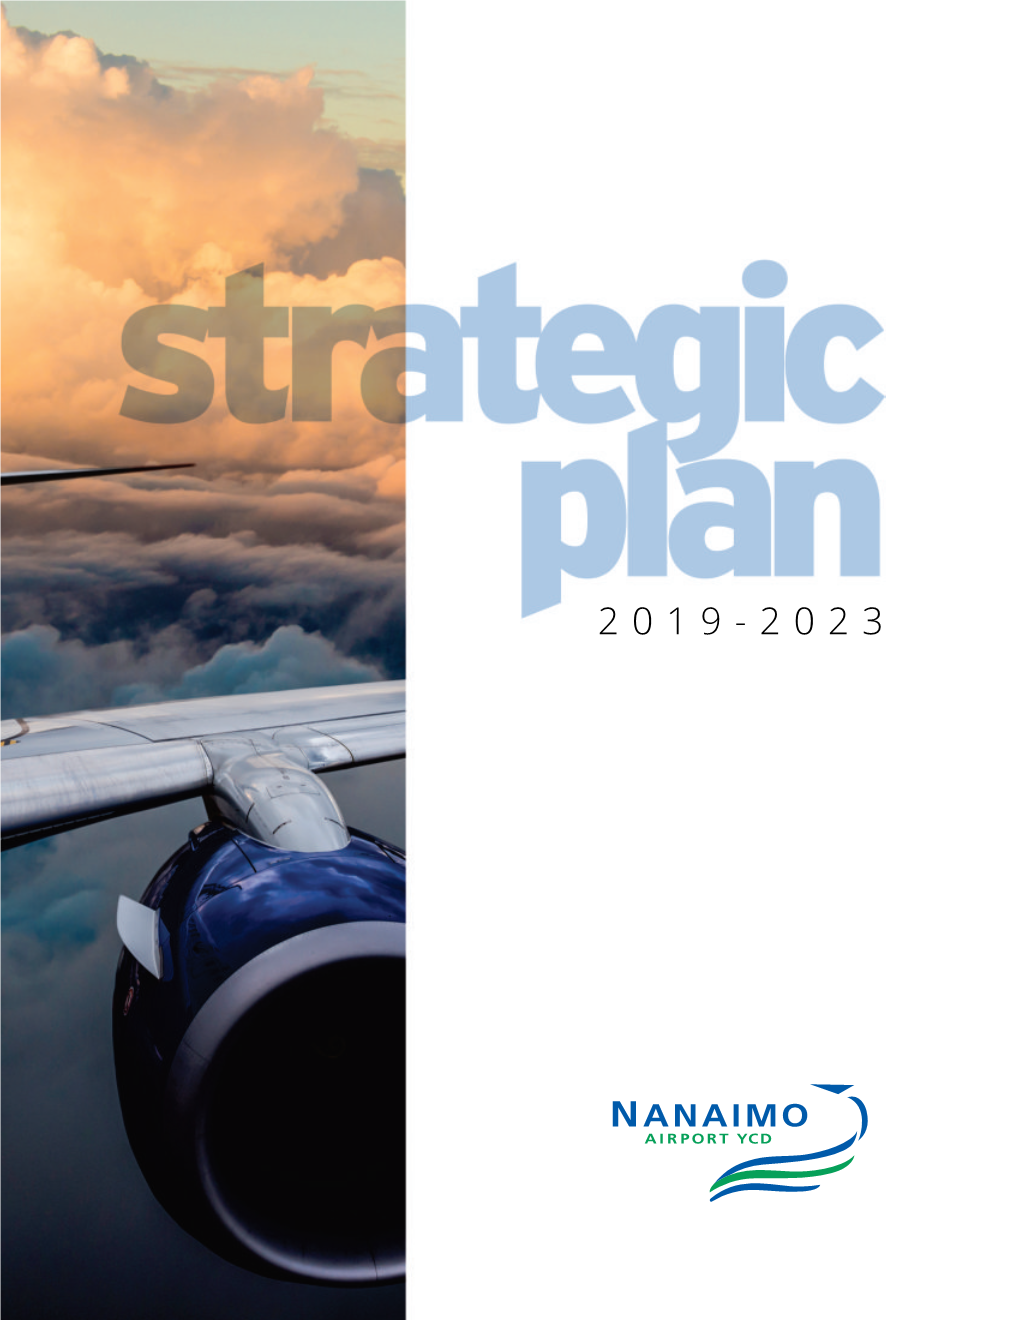 The Nanaimo Airport Commission Will Build the Actions Into the Annual Business Plan POPULATION EMPLOYMENT